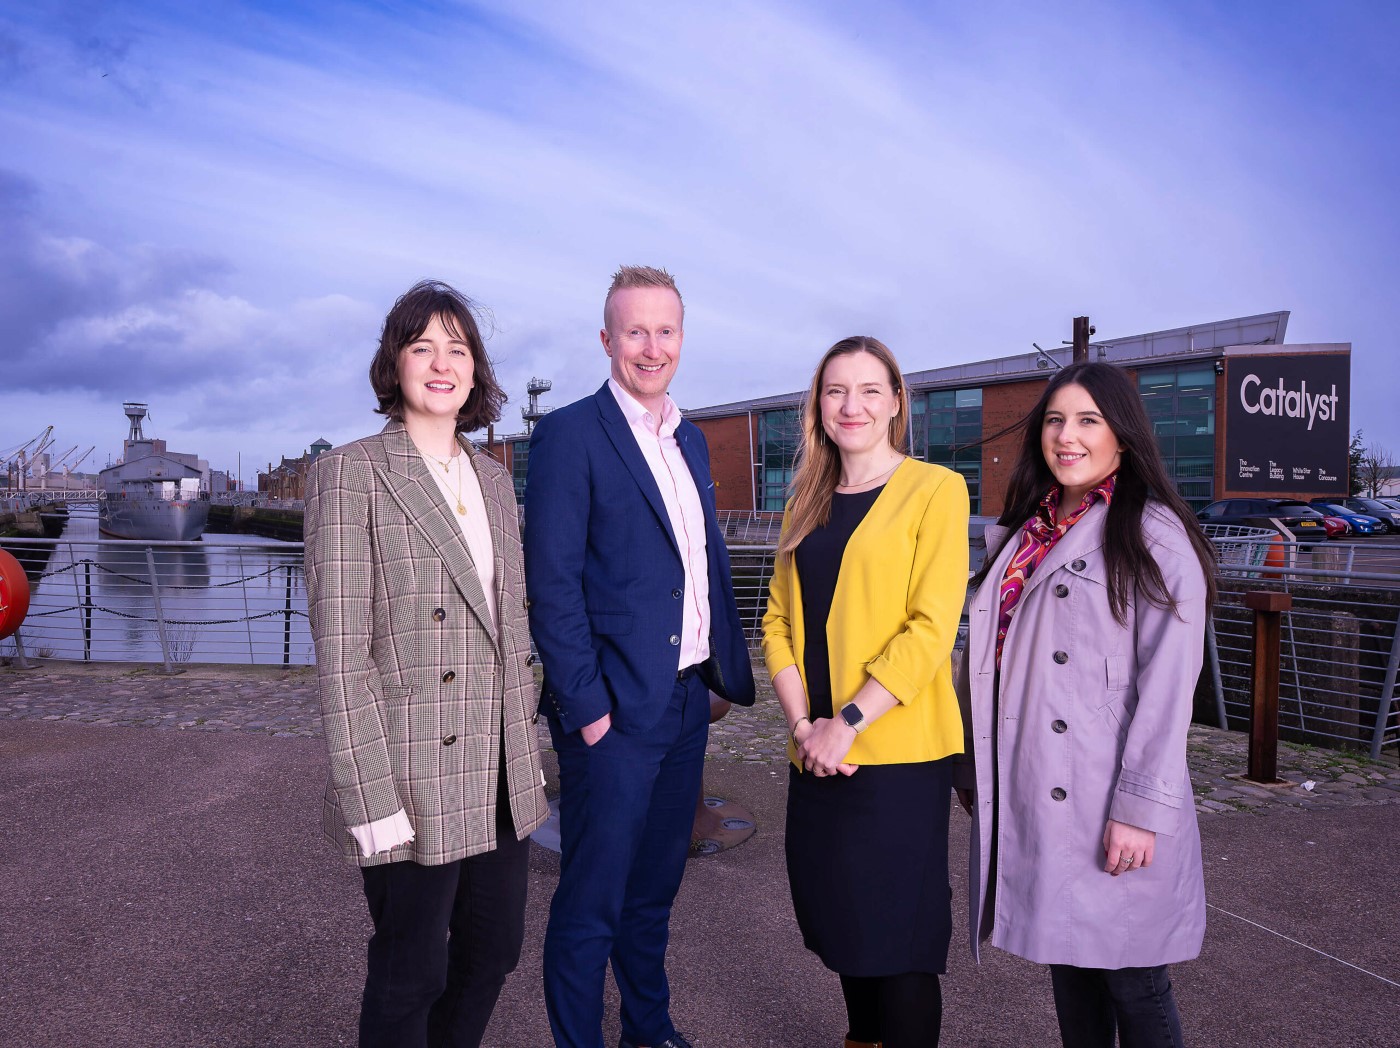 From left Meg Magill, INVENT Programme Manager, Niall Devlin, Head of Business Banking NI at Bank of Ireland, Fiona Bennington, Director of Entrepreneurship and Scaling at Catalyst, Maebh Reynolds, CEO & Co-Founder of GoPlugable